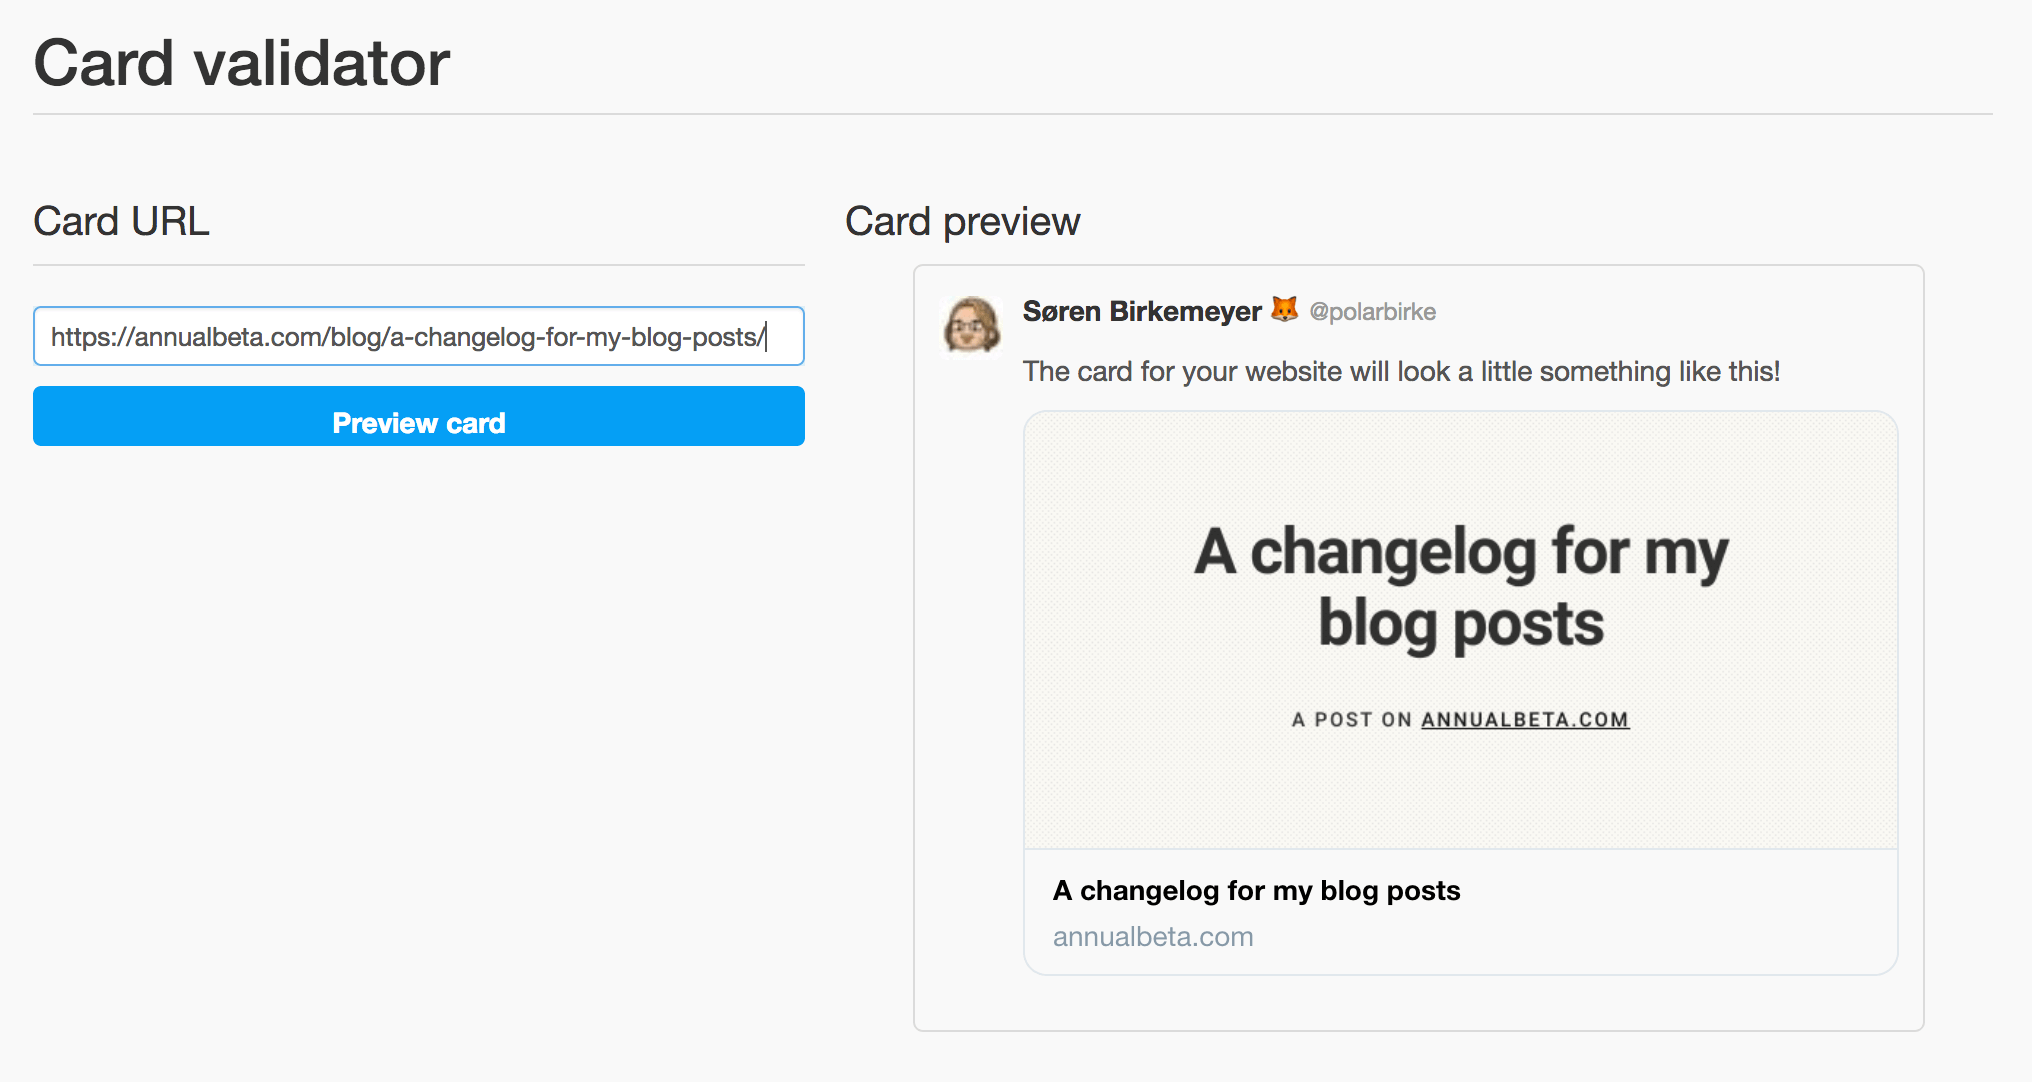 Screenshot of Twitter's card validator, showing the social image for a blog post, saying "A changelog for my blog posts – a post on annualbeta.com"